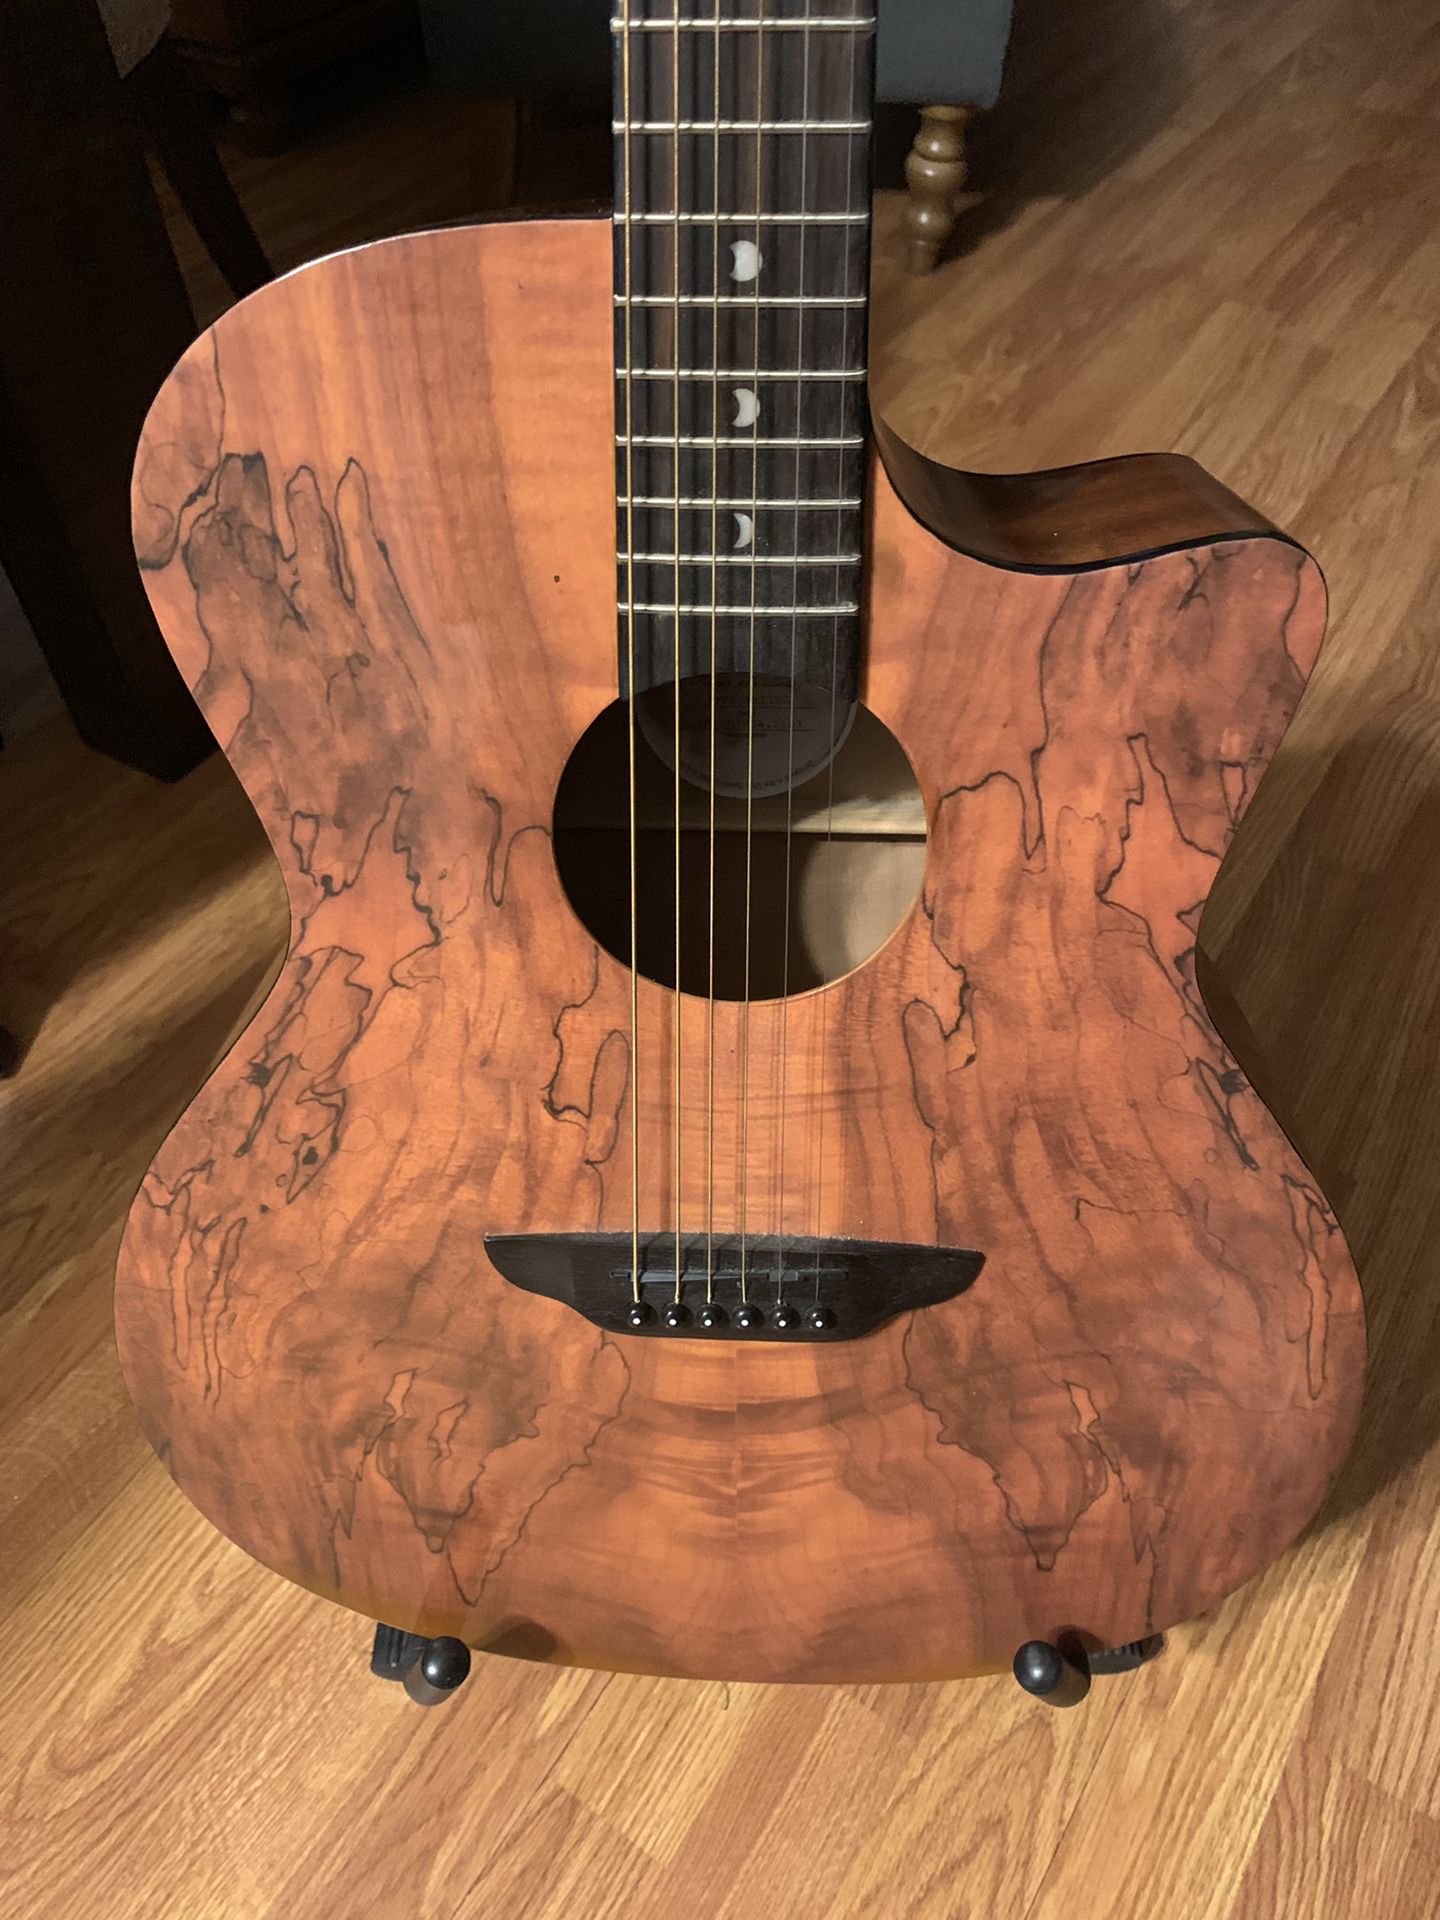 Luna guitar with mahogany back and sides.